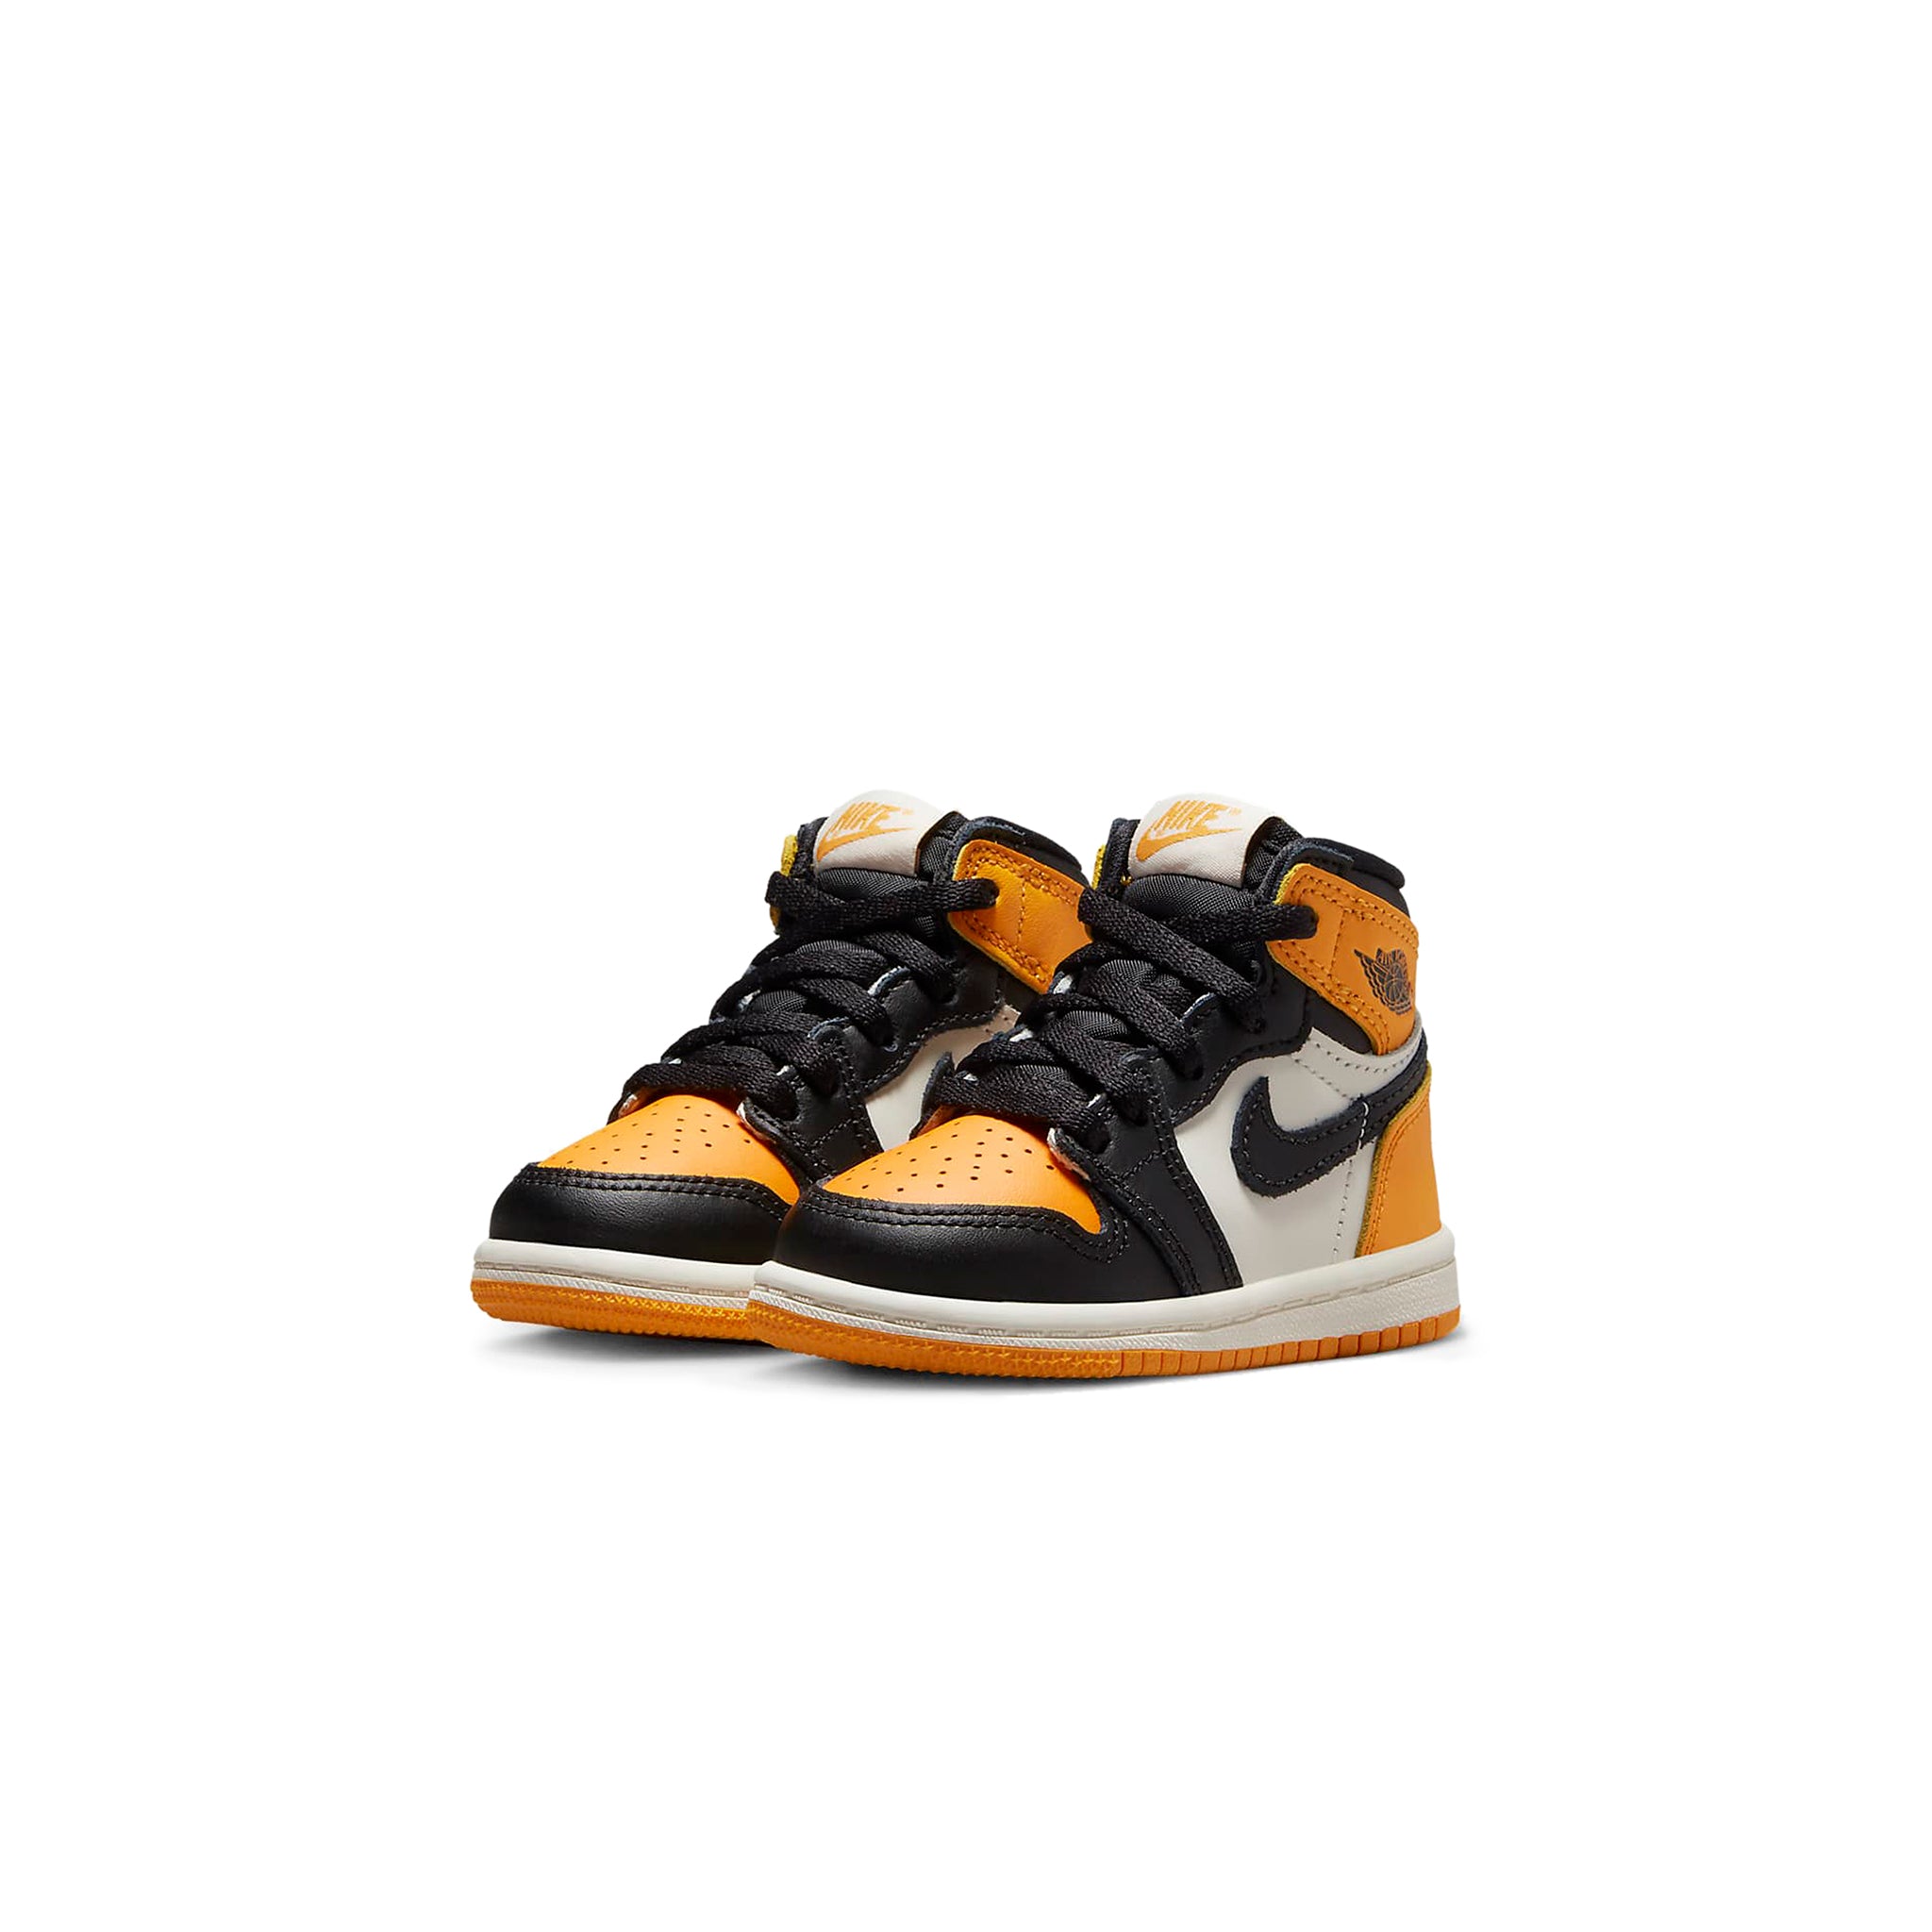 Front side view of Air Jordan 1 Retro High OG Yellow Toe Taxi (TD) AQ2665-711